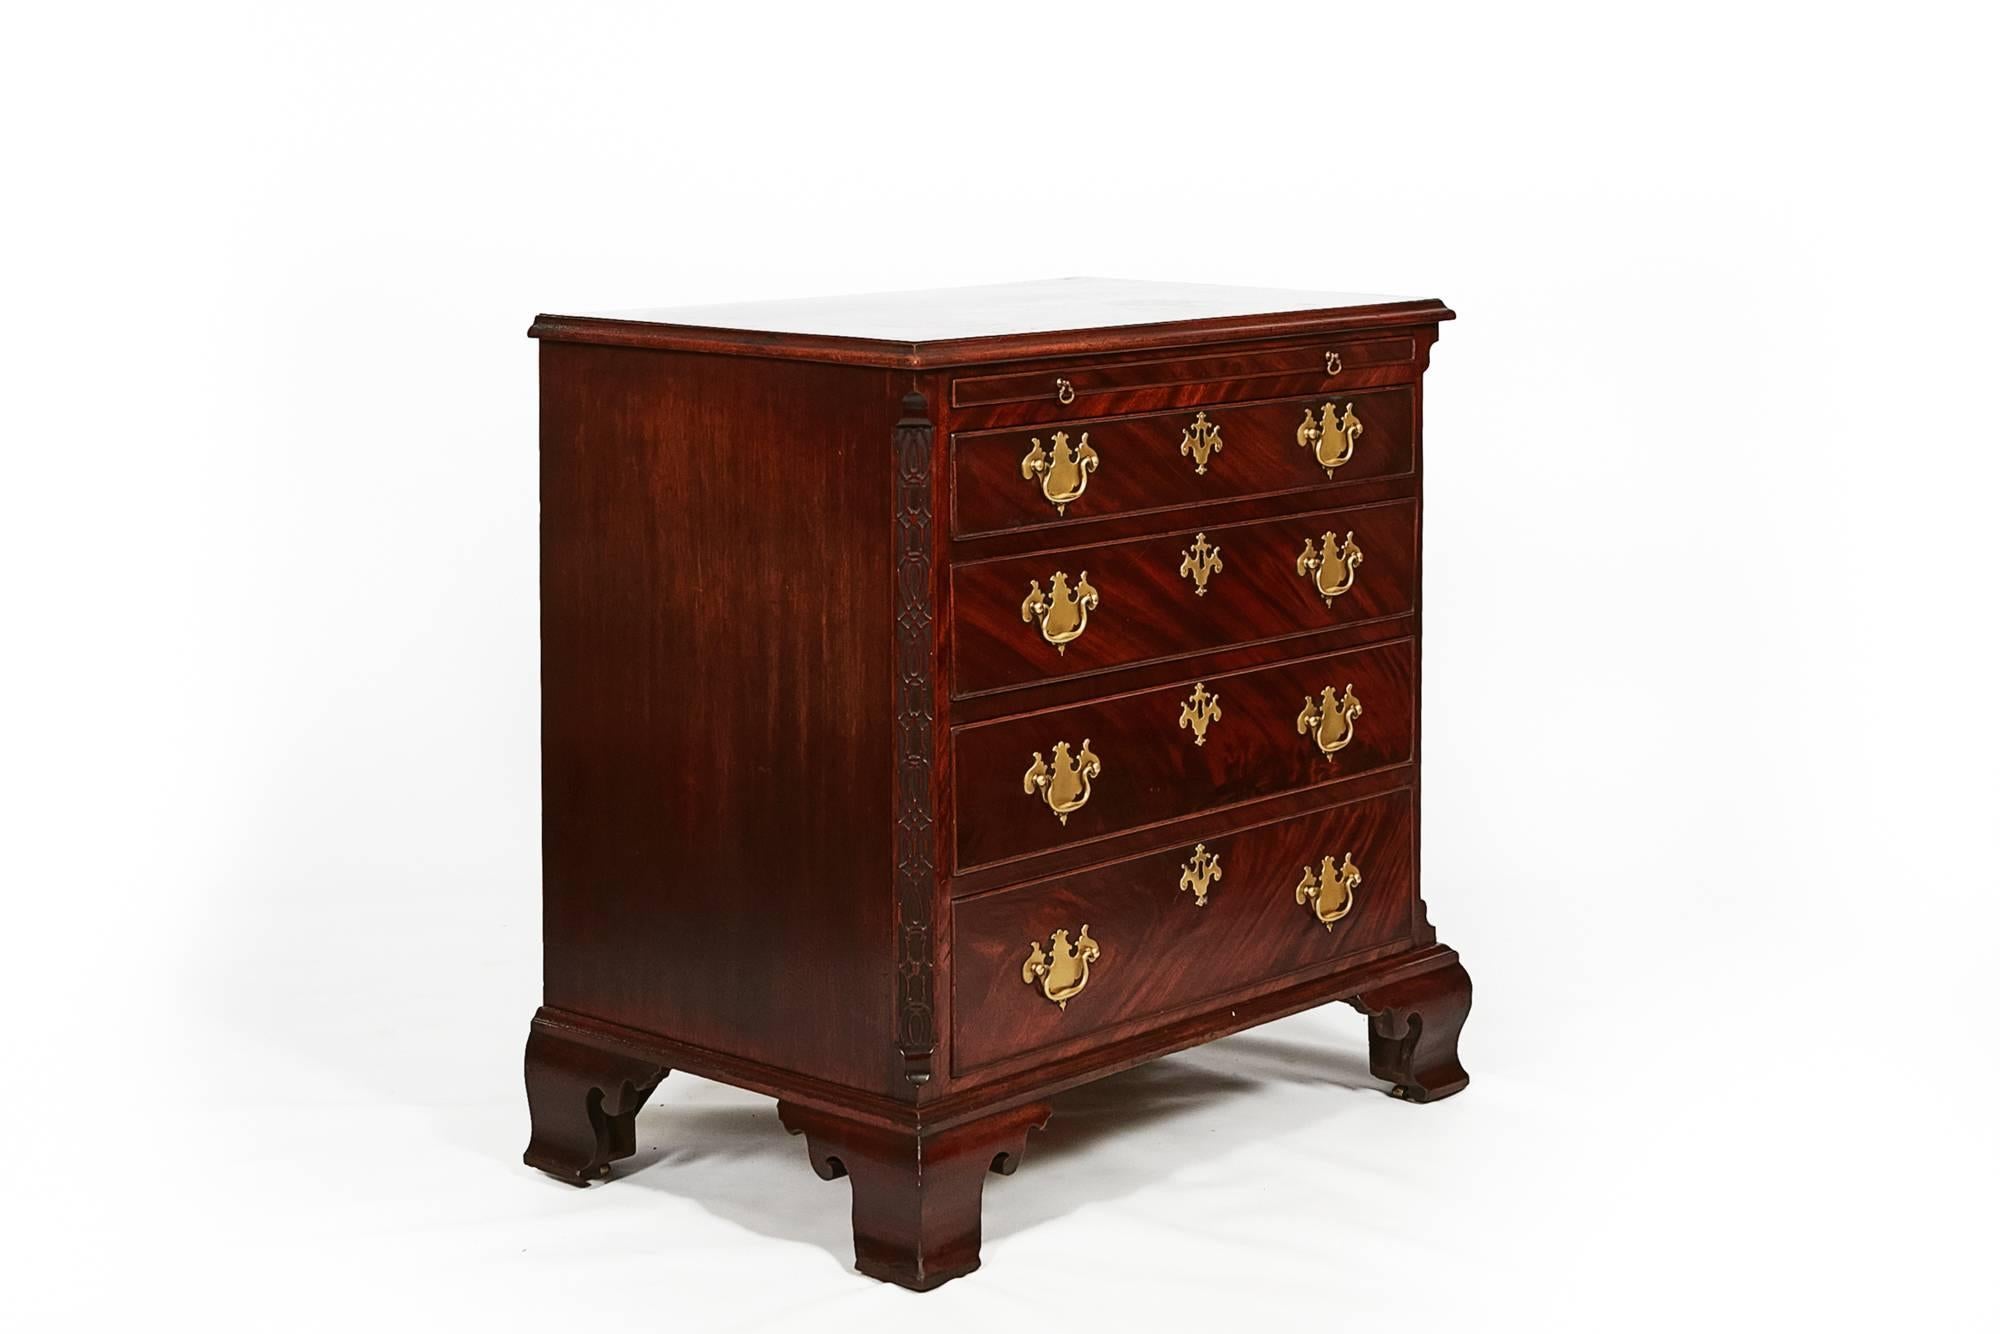 Early 19th century George III bachelor’s flame mahogany four-drawer chest with pull-out writing slide, brass pulls, canted corners with relief carving supported on ogee bracketed feet.